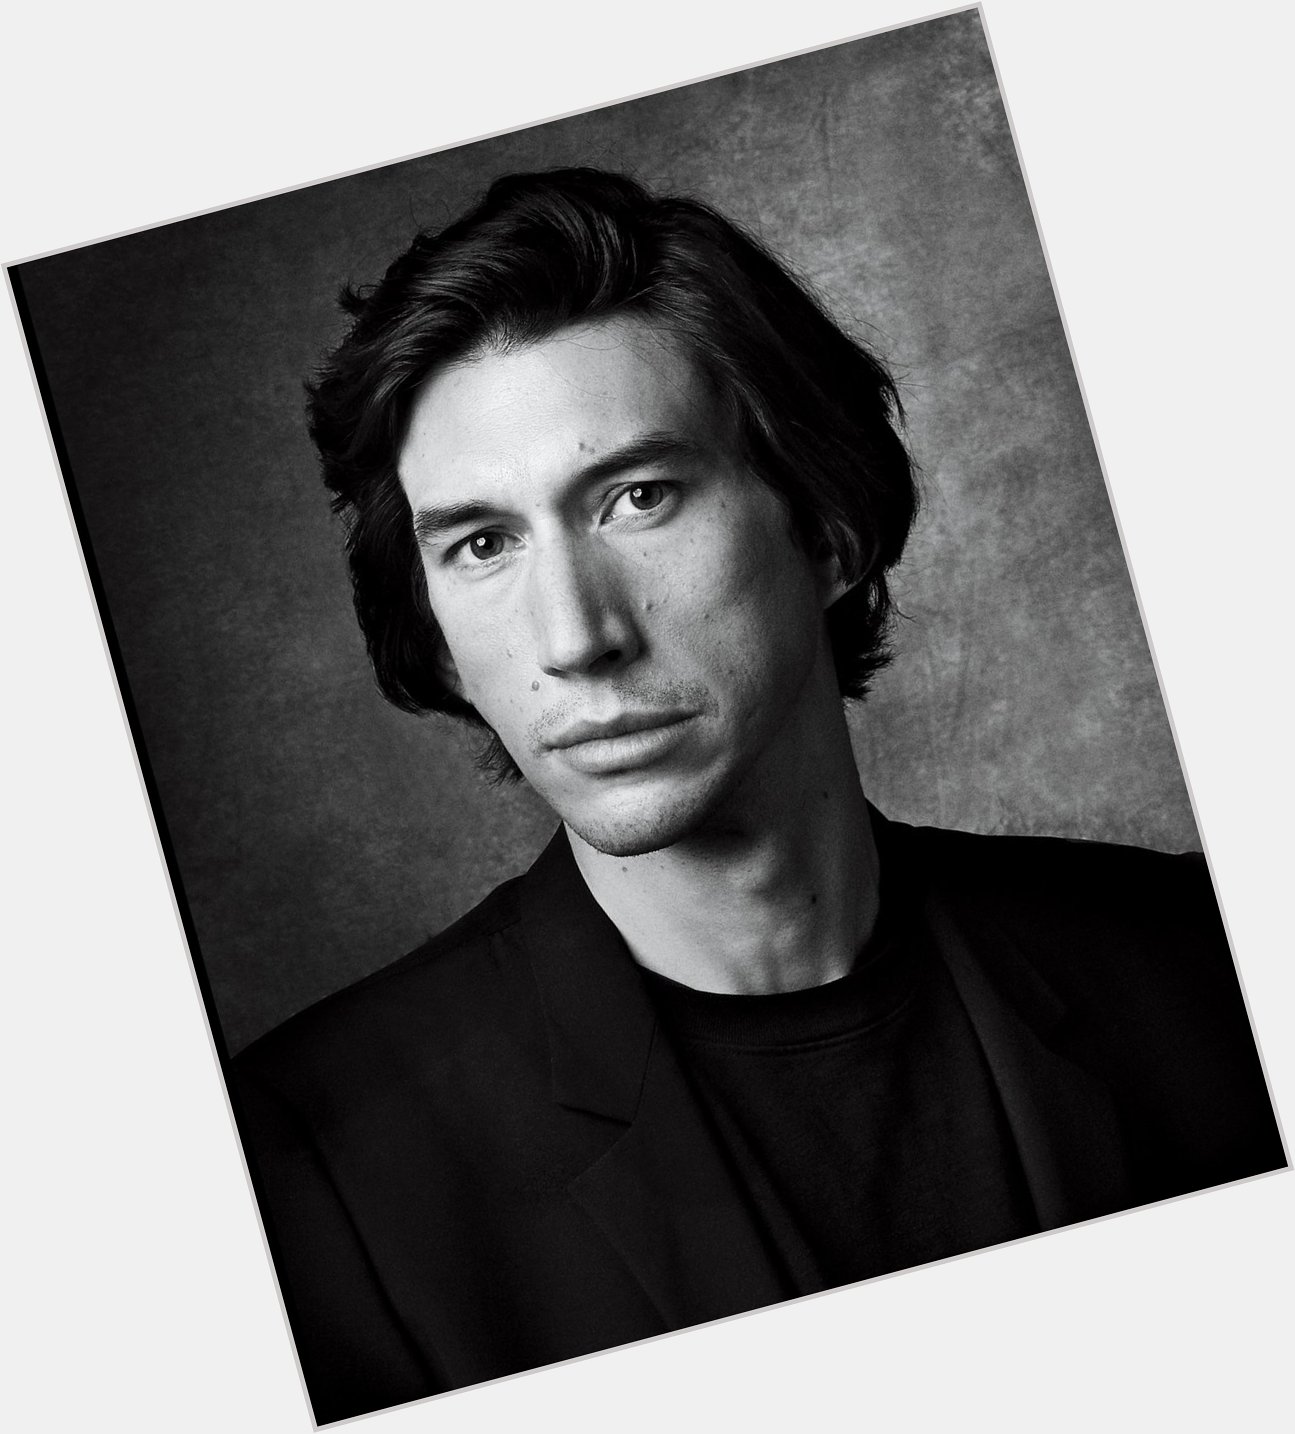 Happy Birthday to the force that is Adam Driver! : Mark Seliger / Queue Cover 2019 